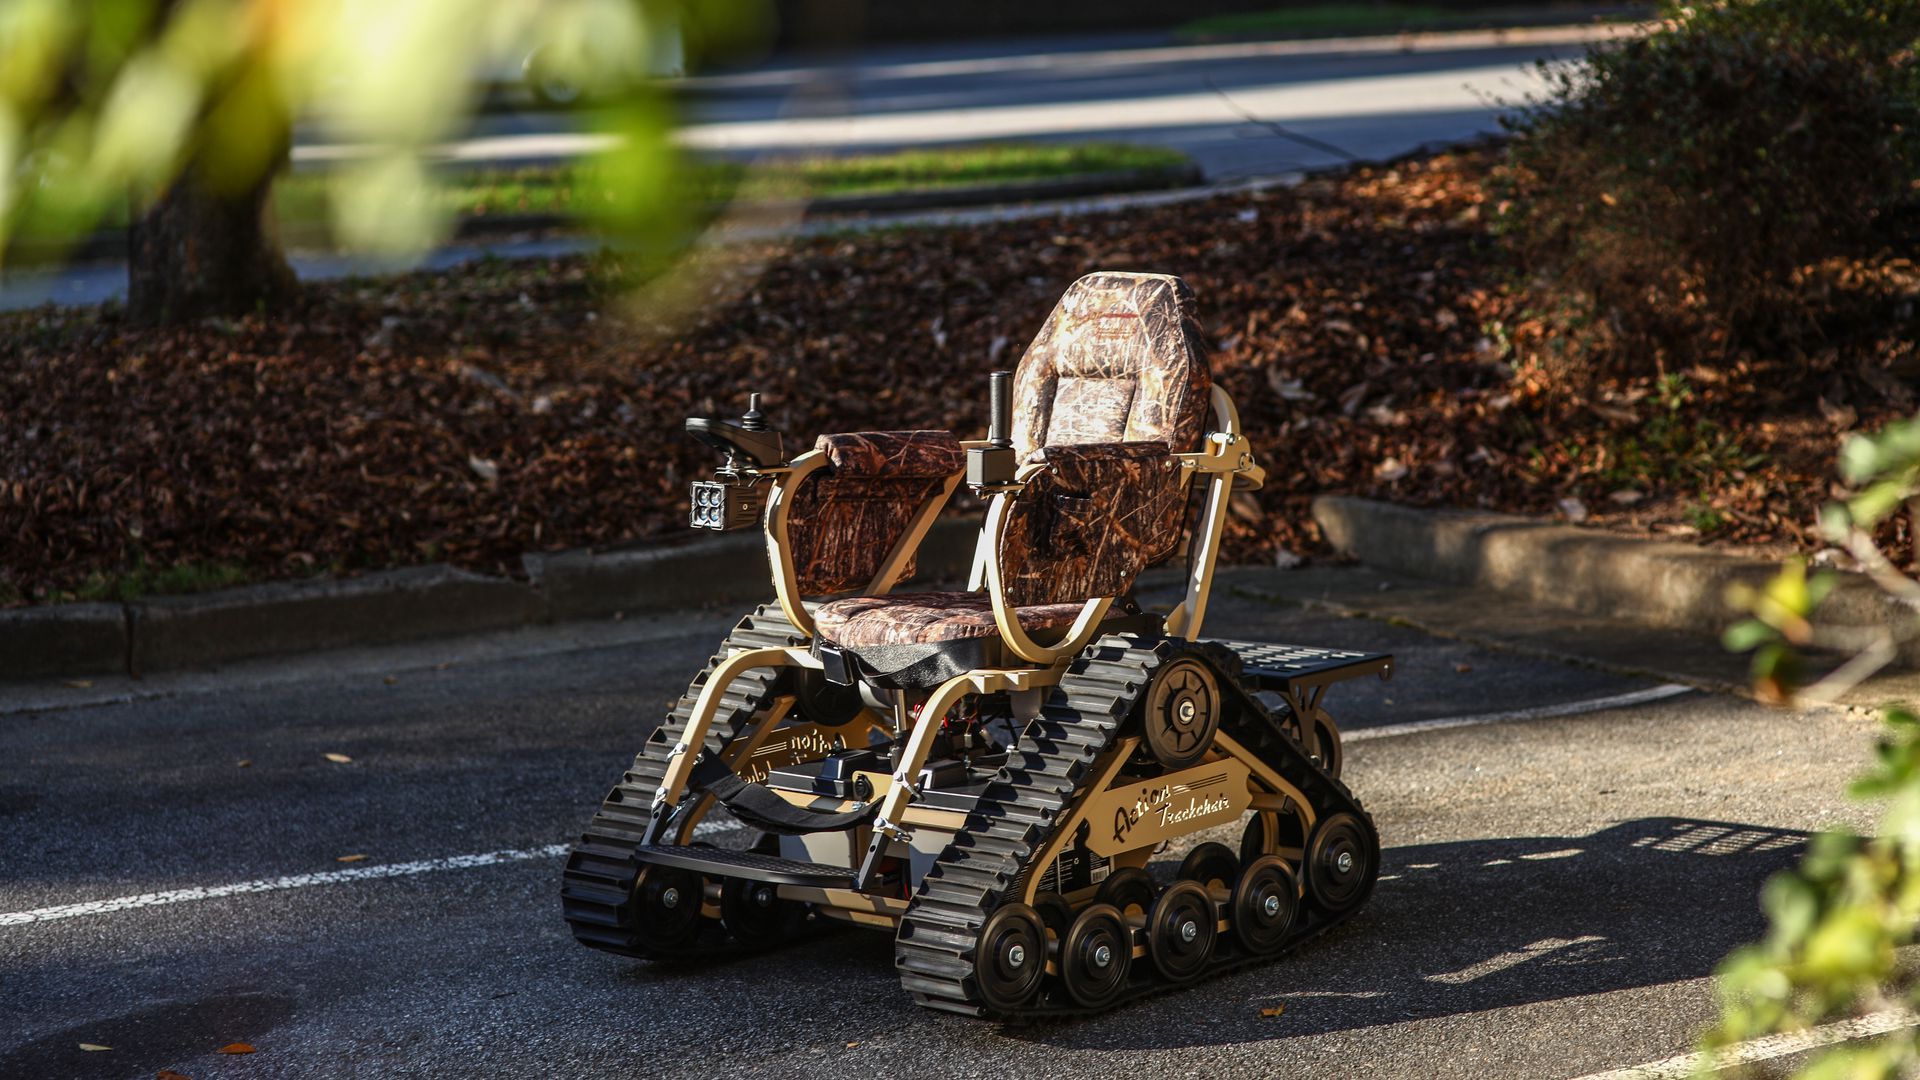 An "all terrain chair" a new vehicle that will help people with disabilities take strolls in state parks.